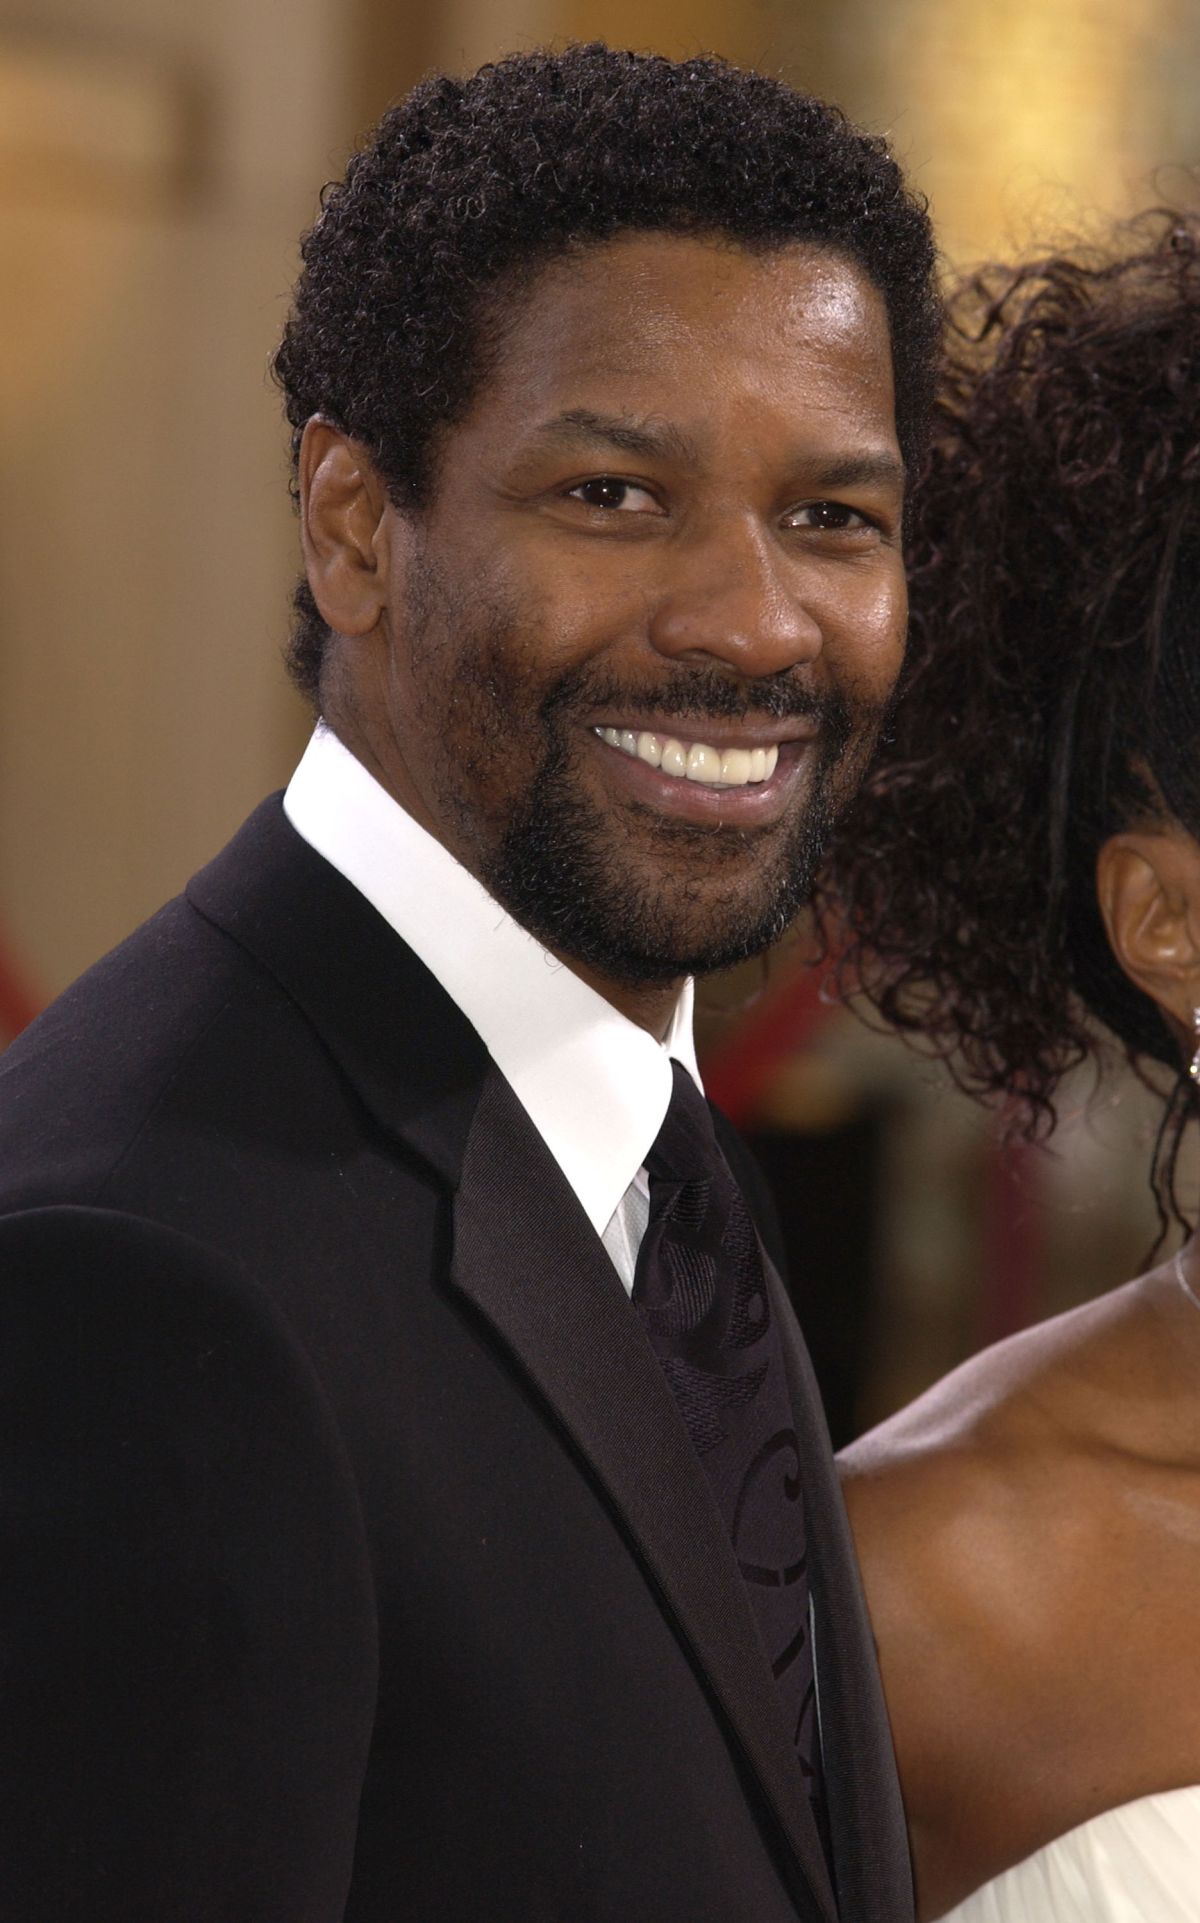 Then And Now Denzel Washington Over The Years [photos] 101 1 The Wiz